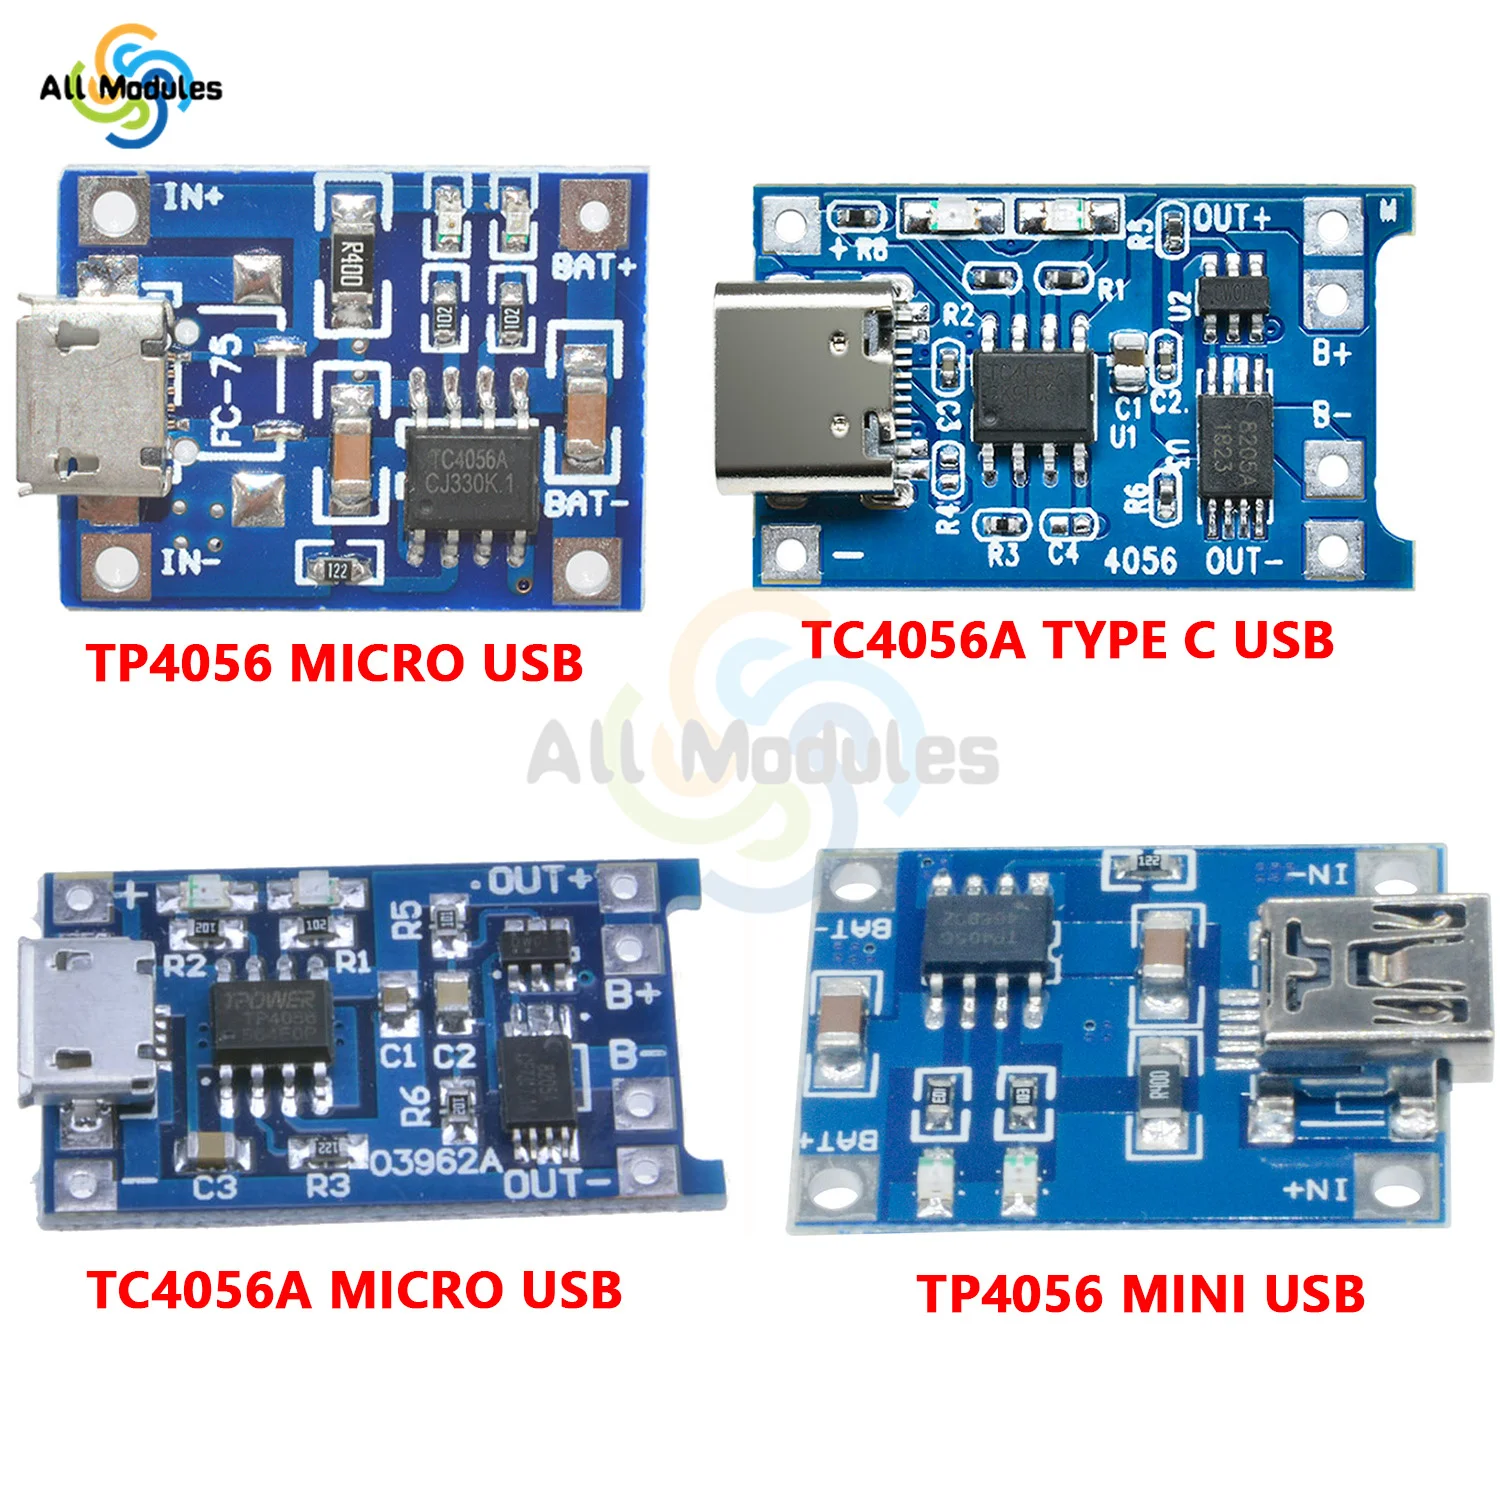 

Type-c/Micro/Mini USB 18650 TP4056 TC4056A Lithium Battery Charger Module Charging Board With Protection Dual Functions 5V 1A